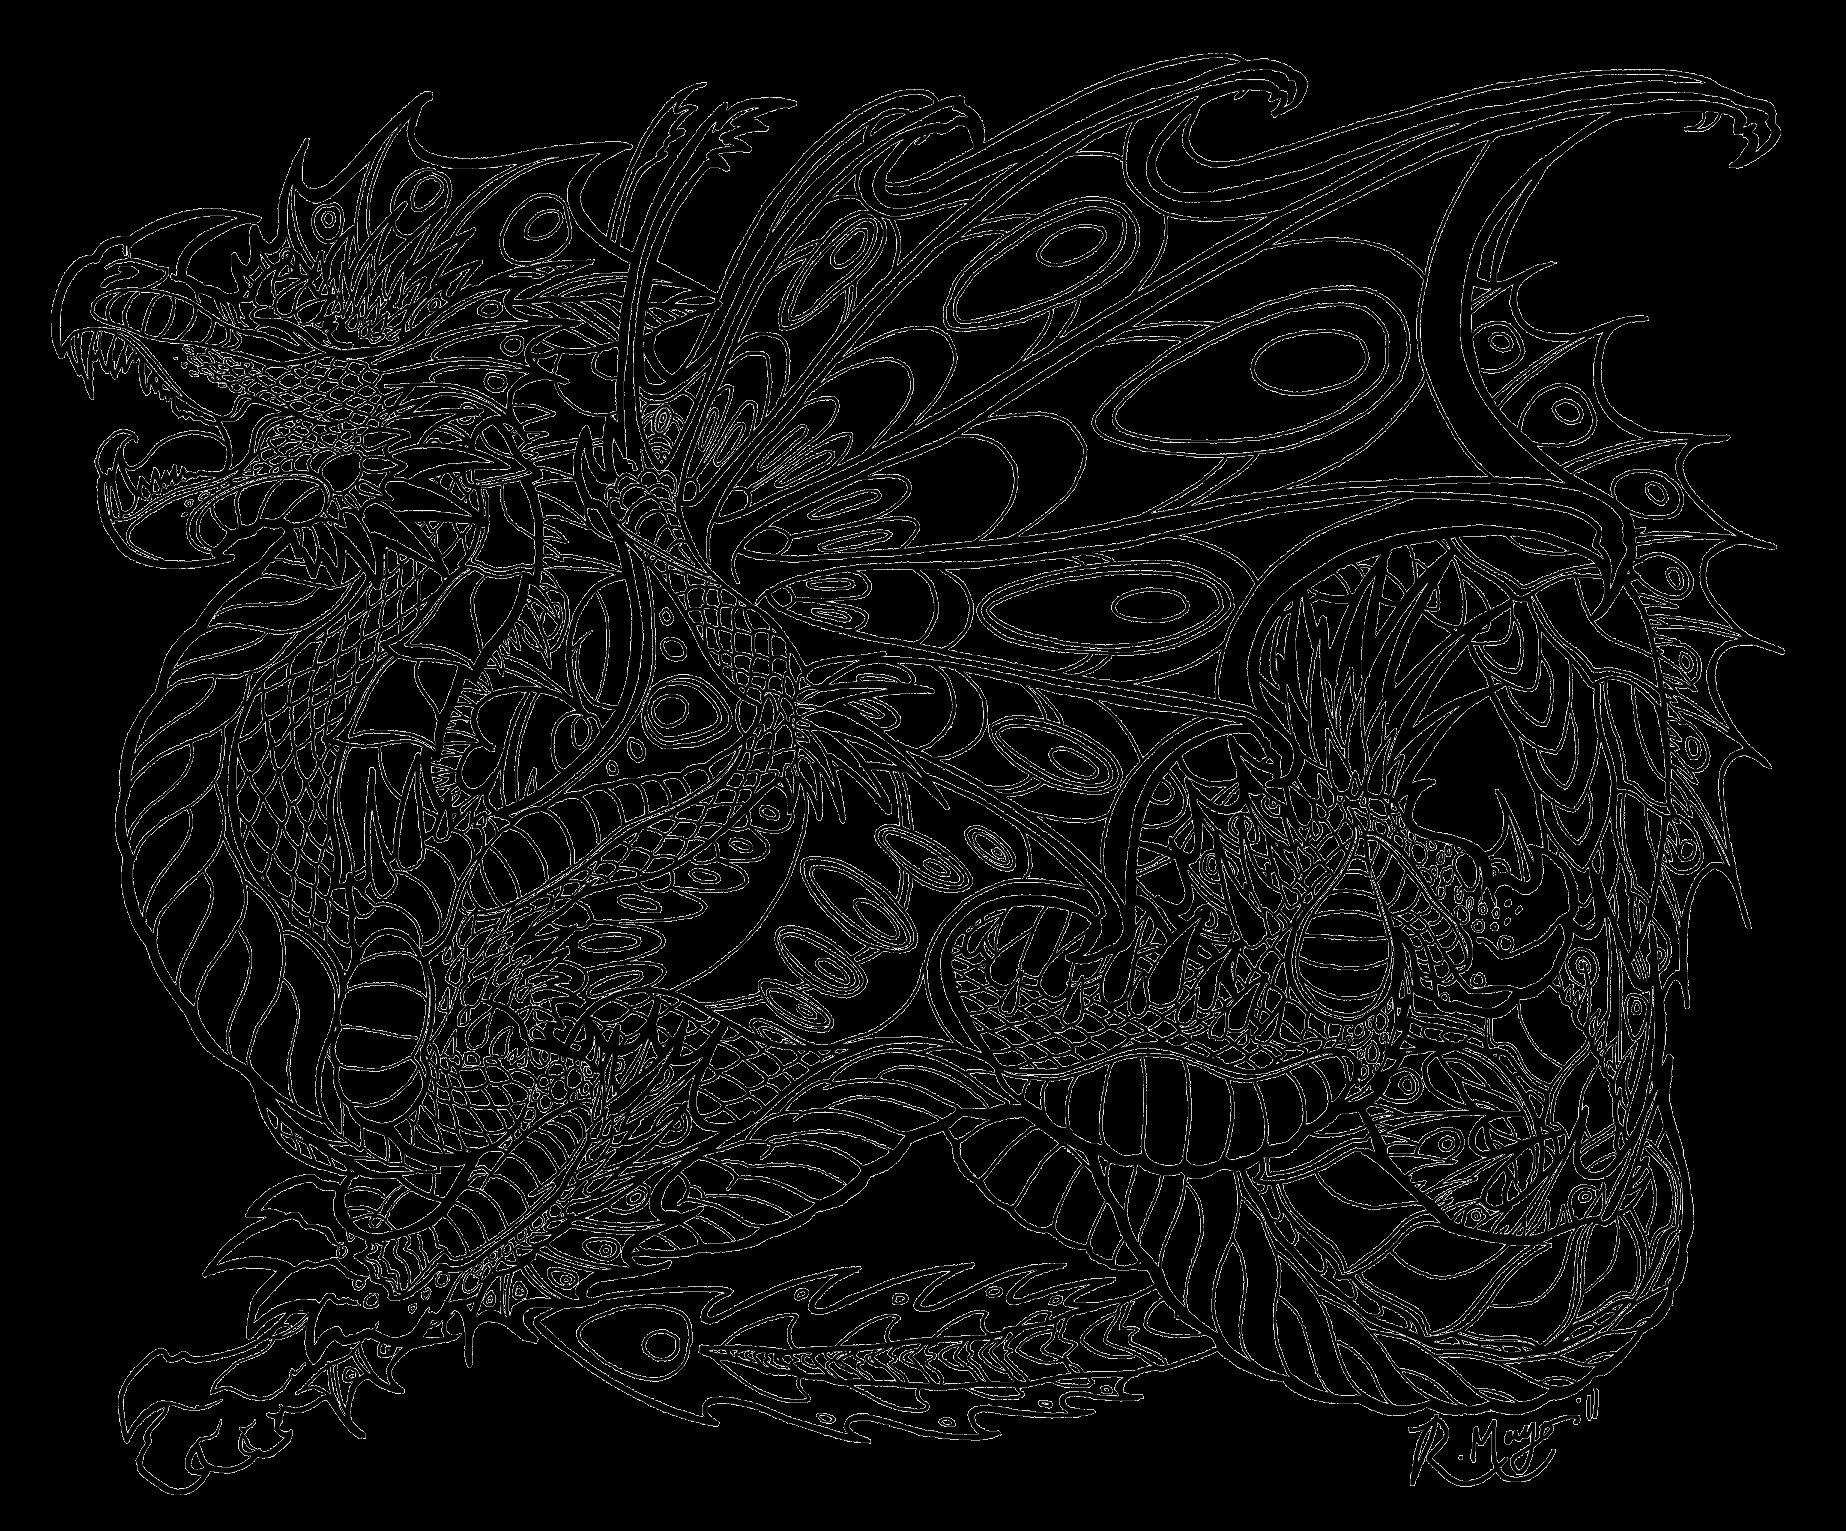 Dragon Coloring Books For Adults
 Coloring Pages For Adults Difficult Dragons at GetDrawings